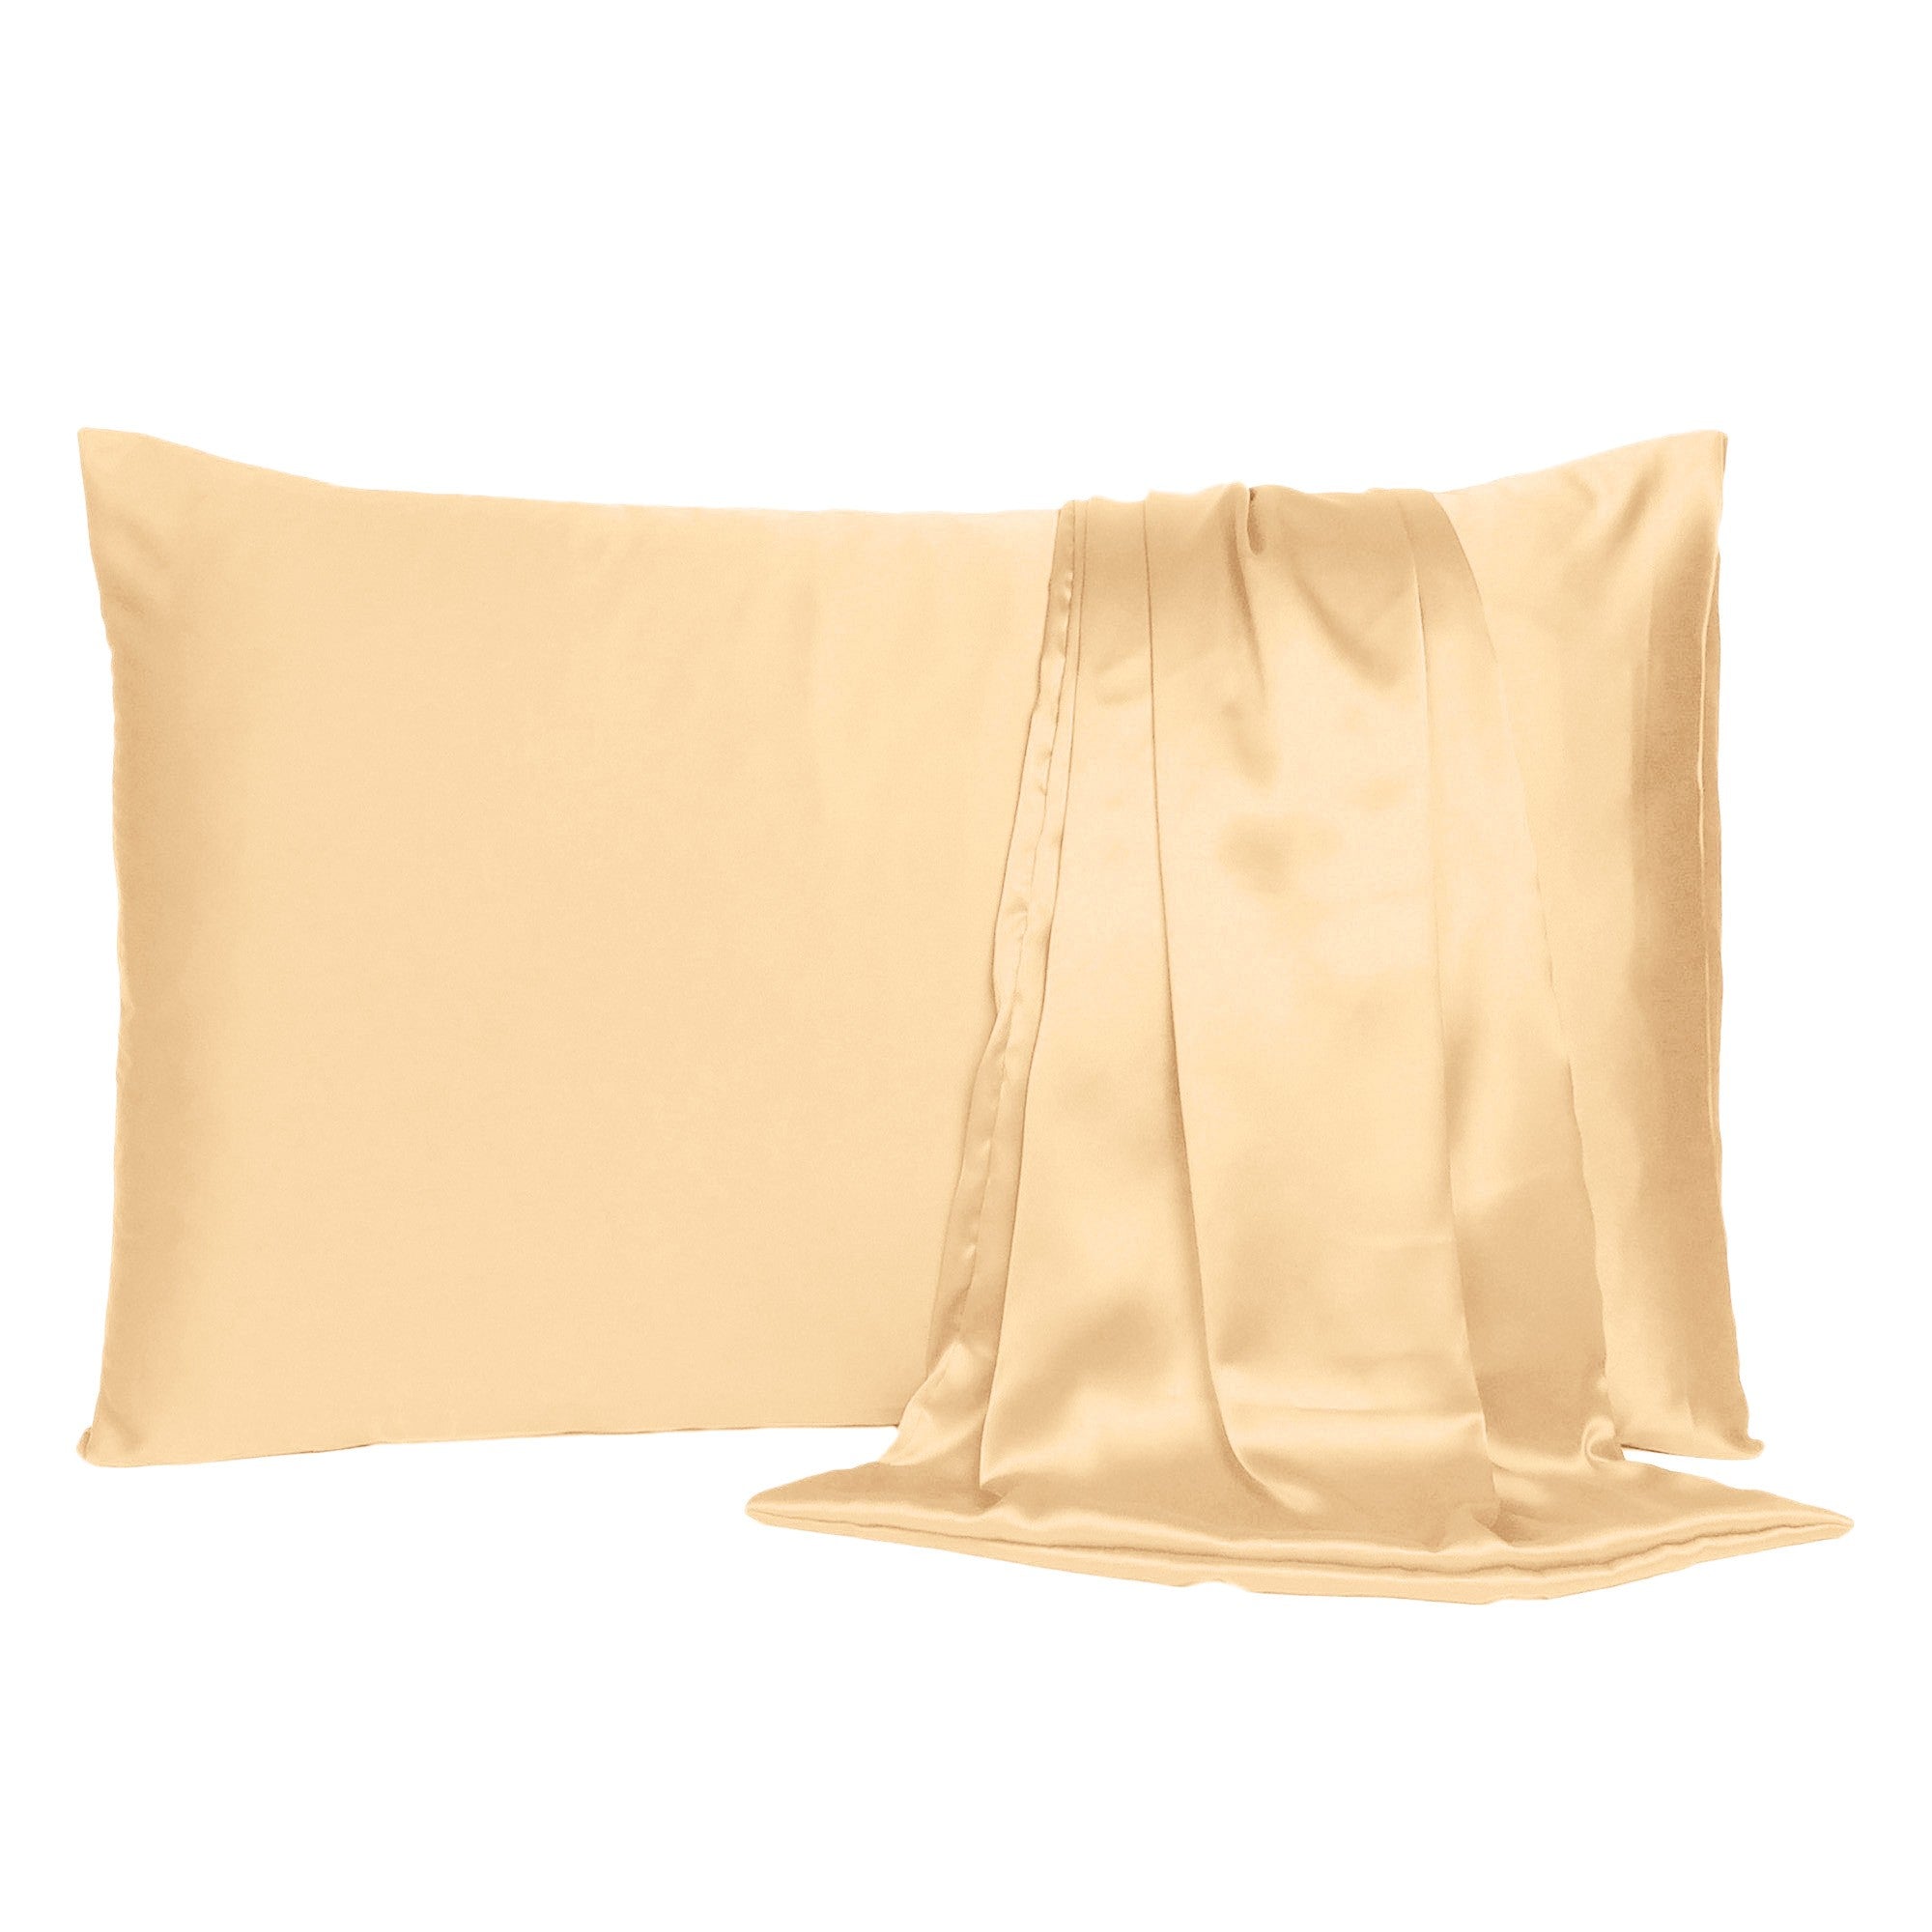 Pale Peach Dreamy Set Of 2 Silky Satin Standard Pillowcases - Tuesday Morning-Bed Sheets